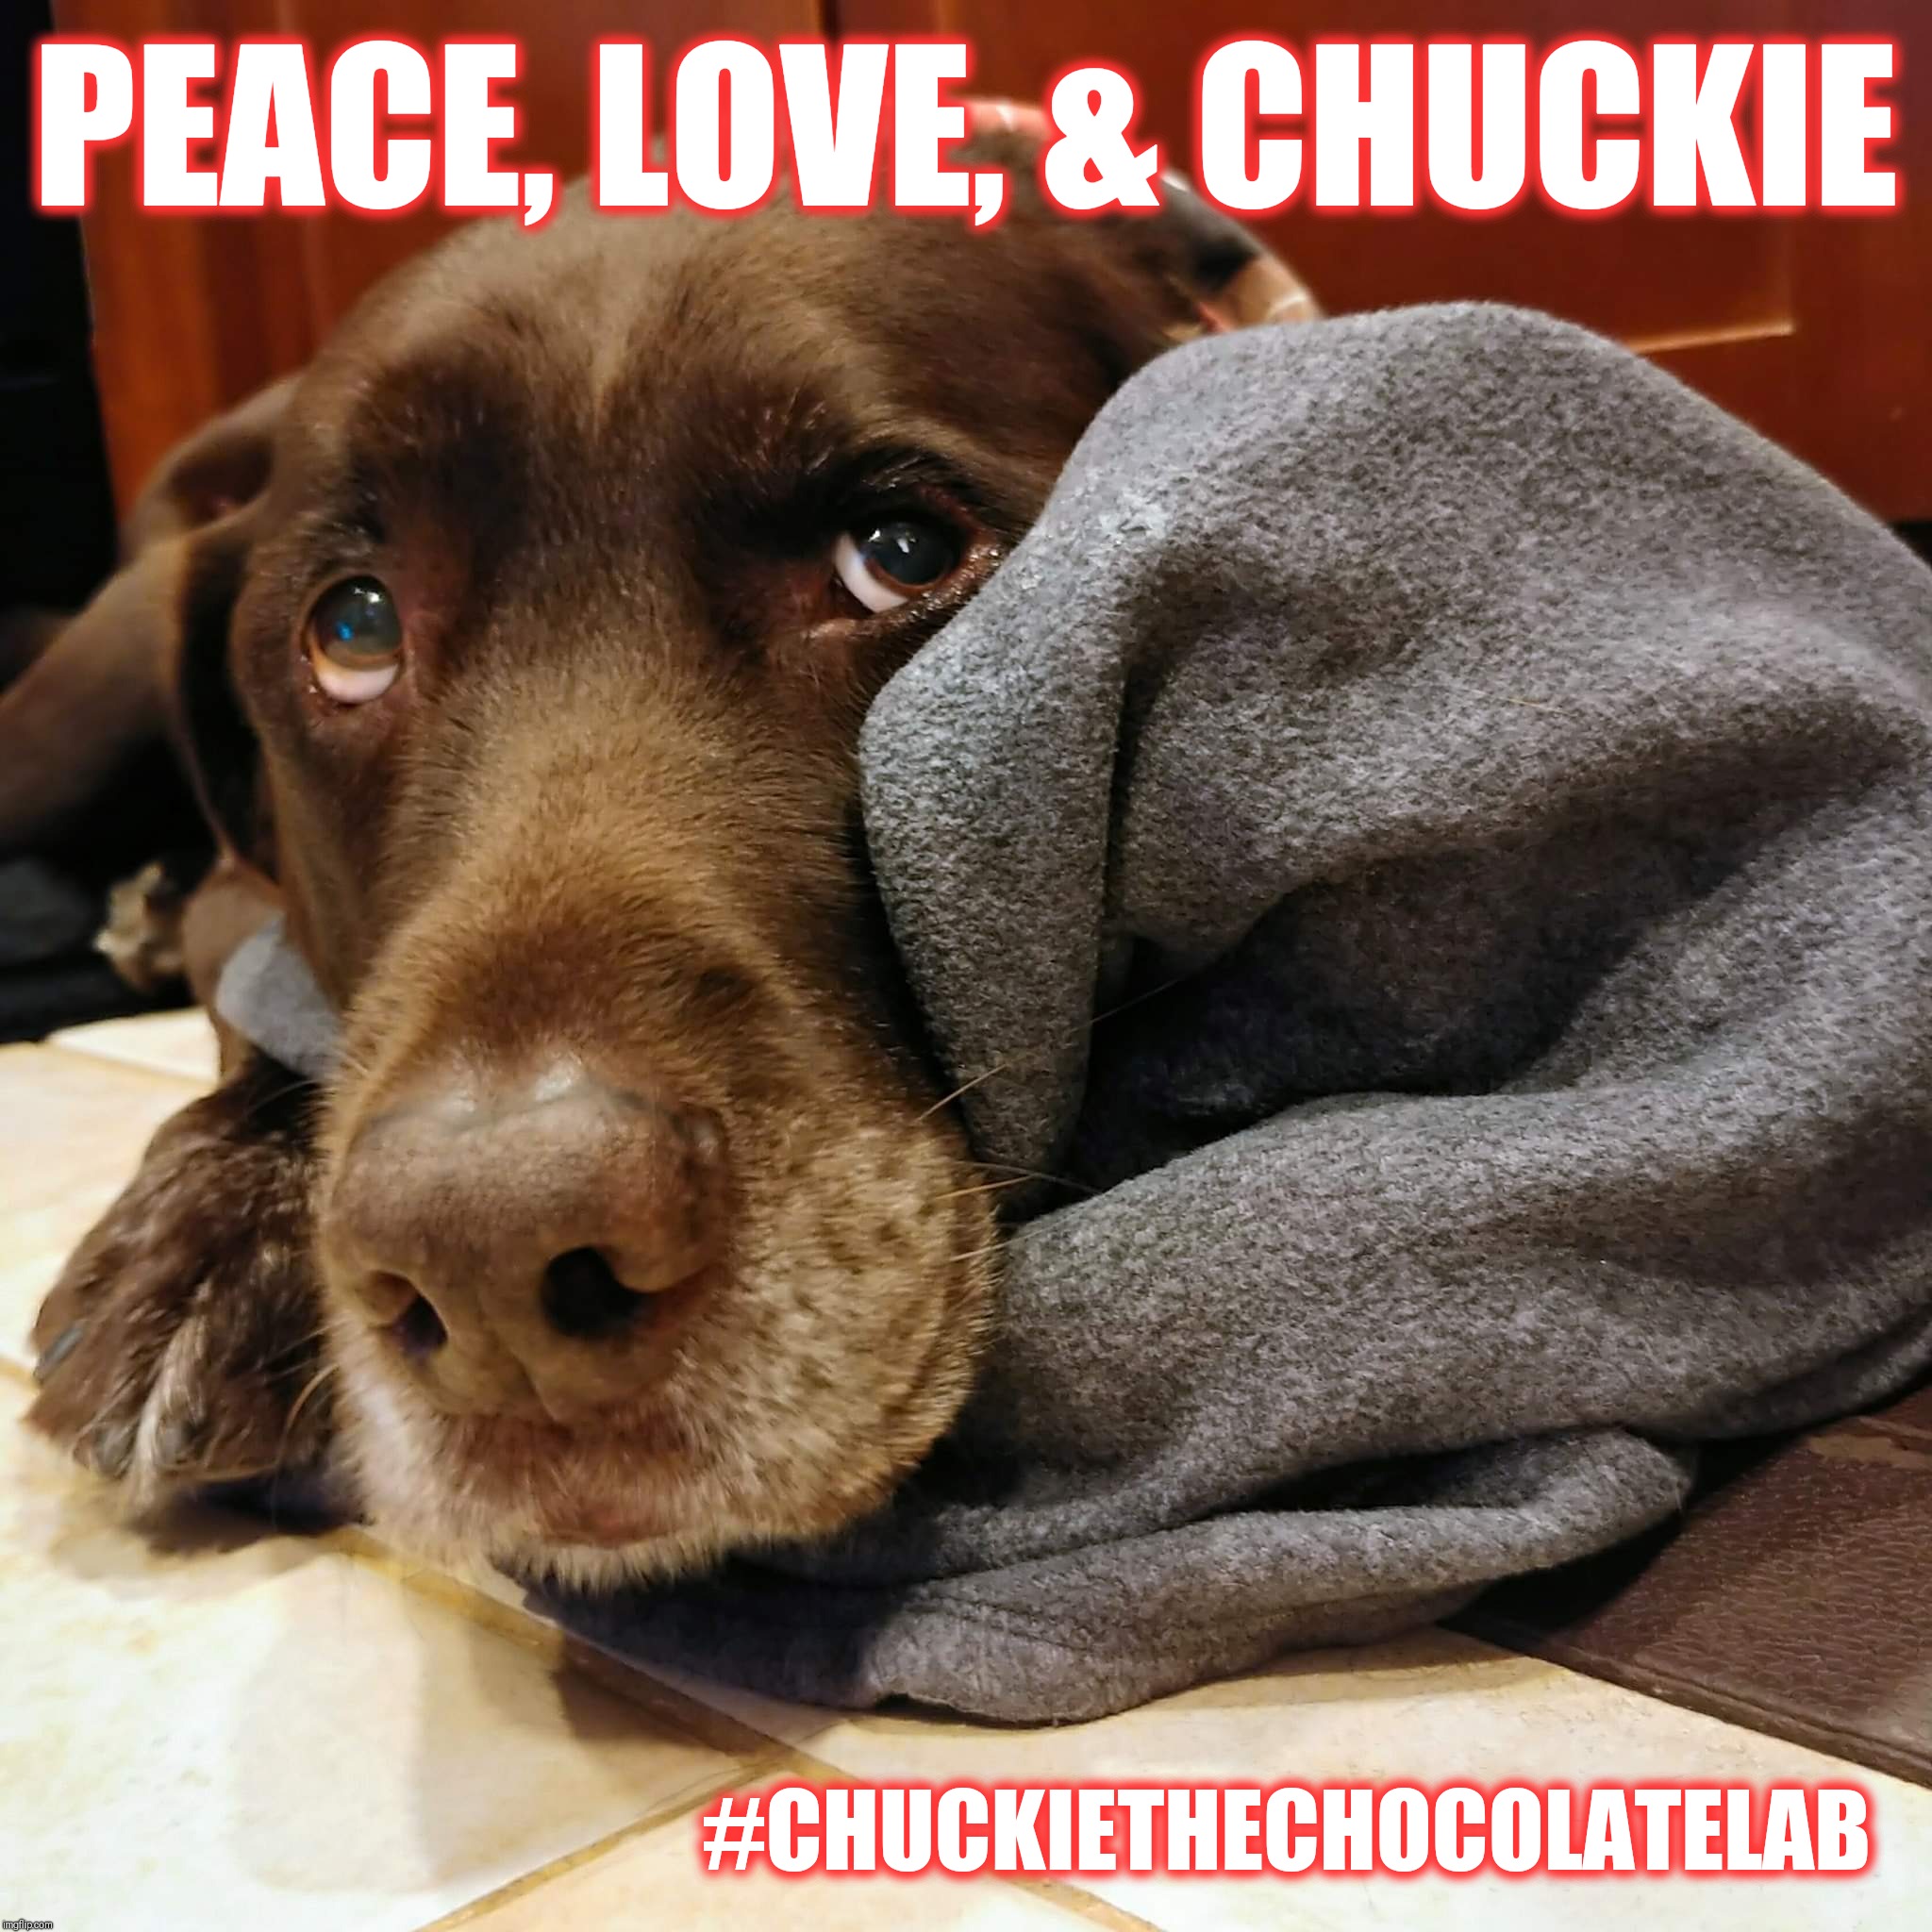 Peace, Love, and Chuckie | PEACE, LOVE, & CHUCKIE; #CHUCKIETHECHOCOLATELAB | image tagged in chuckie the chocolate lab,peace,love,dogs,memes,chocolate lab | made w/ Imgflip meme maker